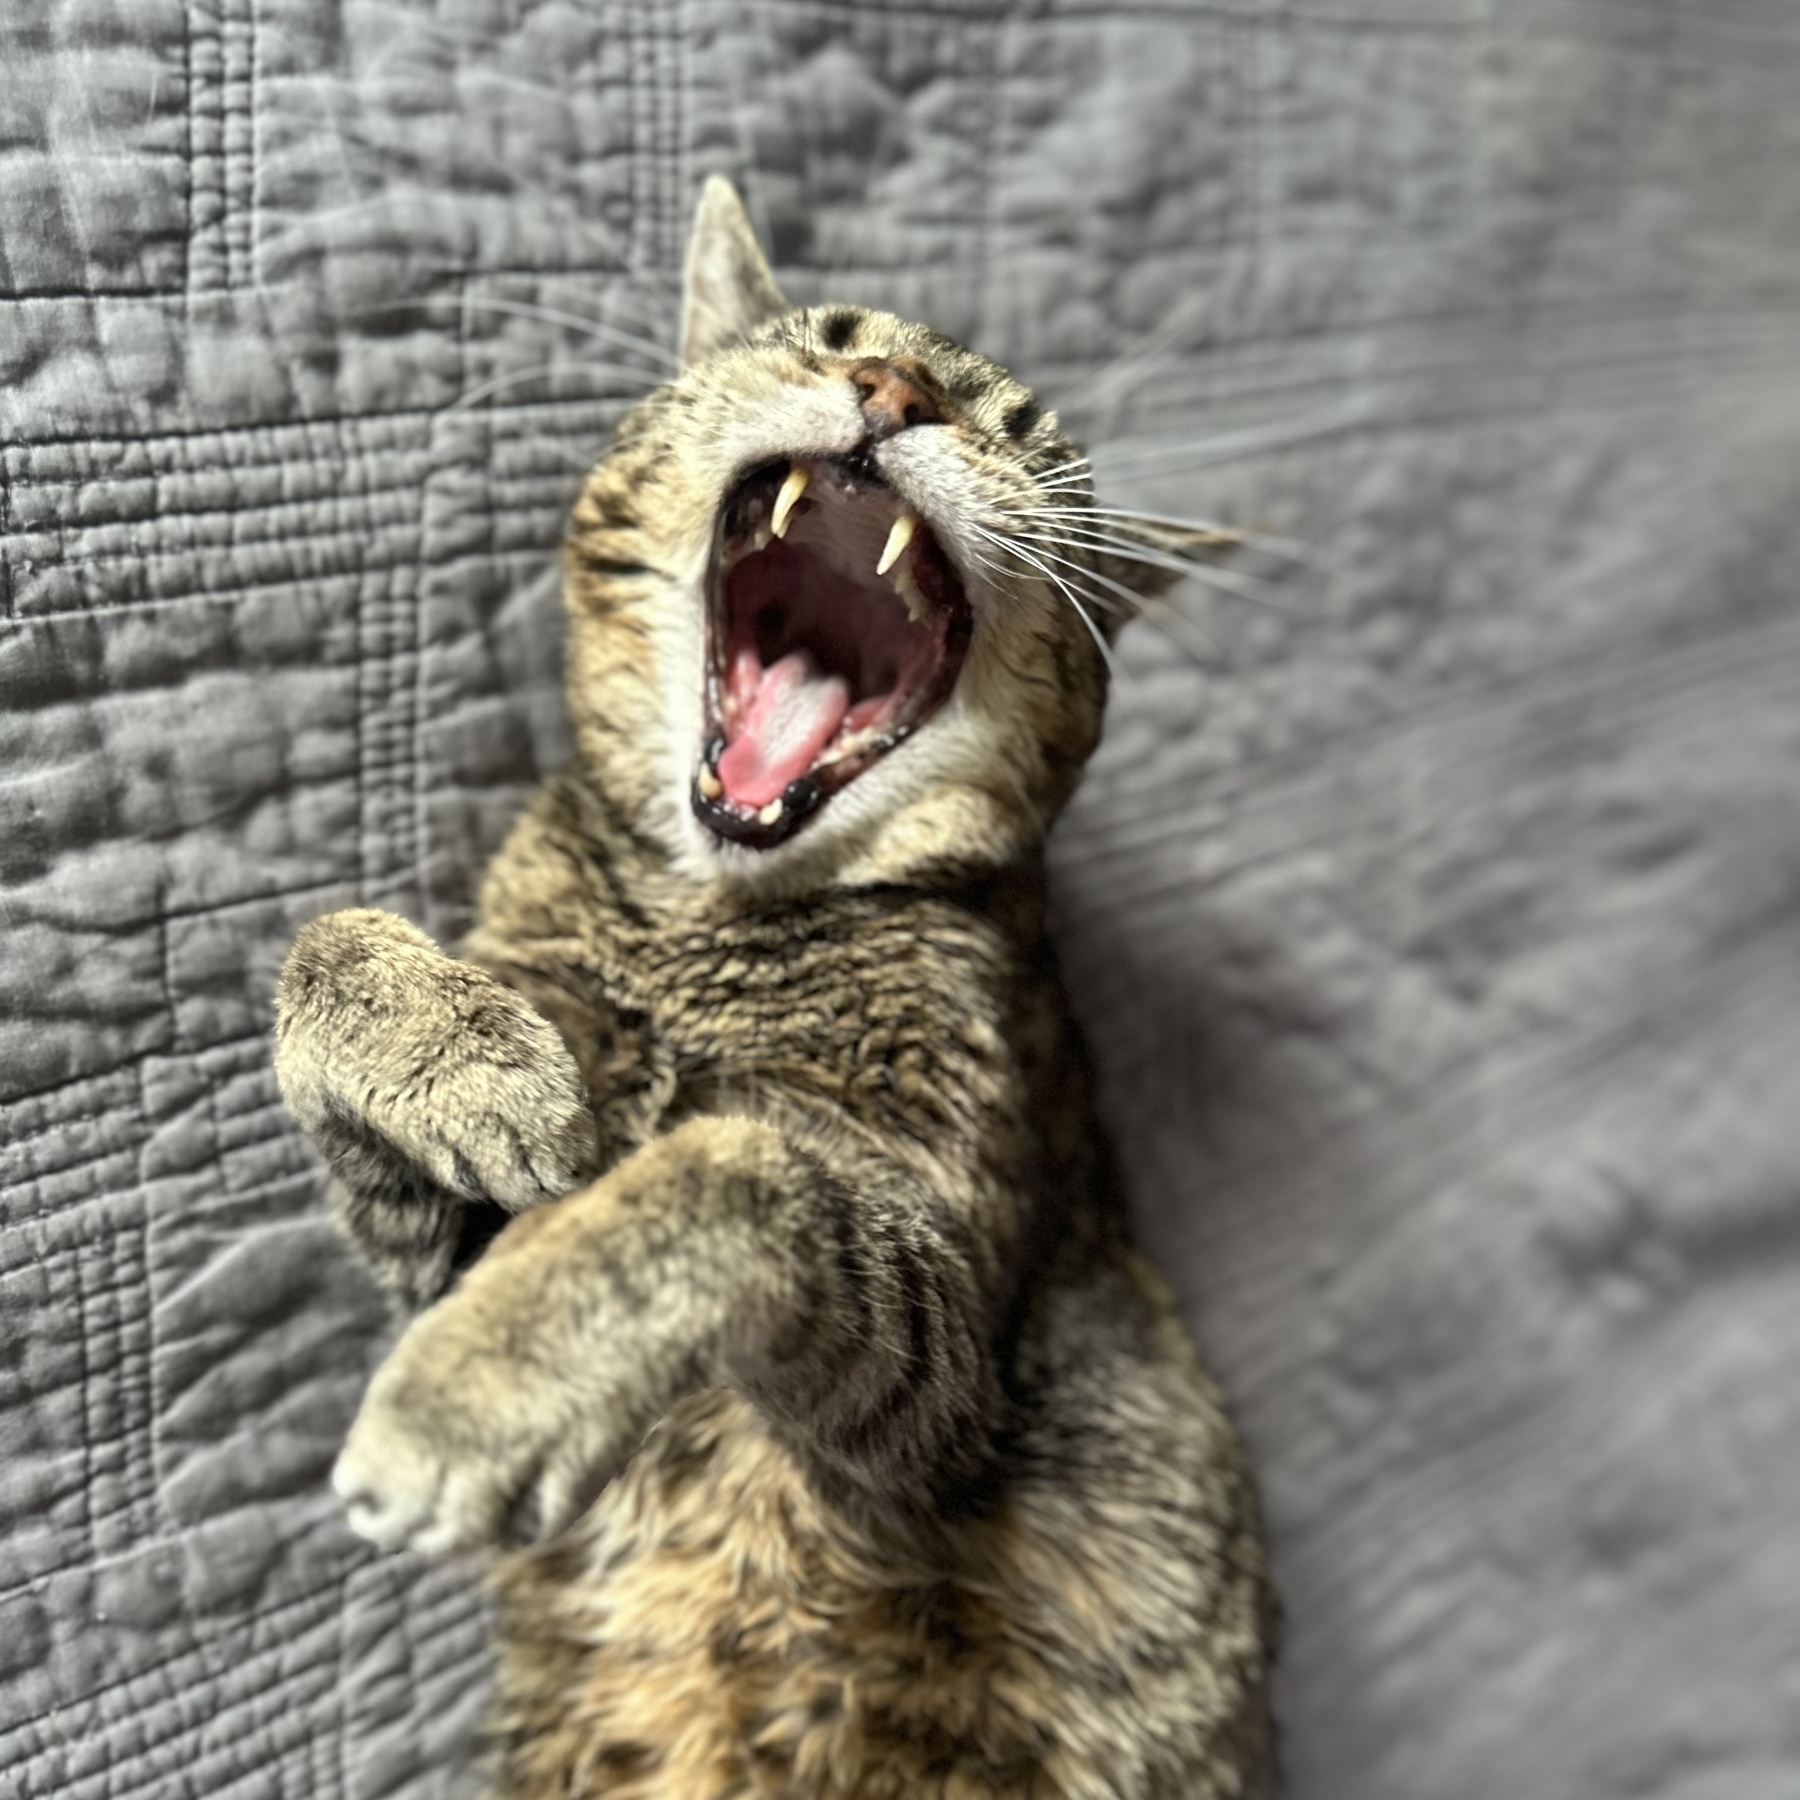 A cat is lying on its back with its mouth open, as if yawning or meowing, on a quilted surface.